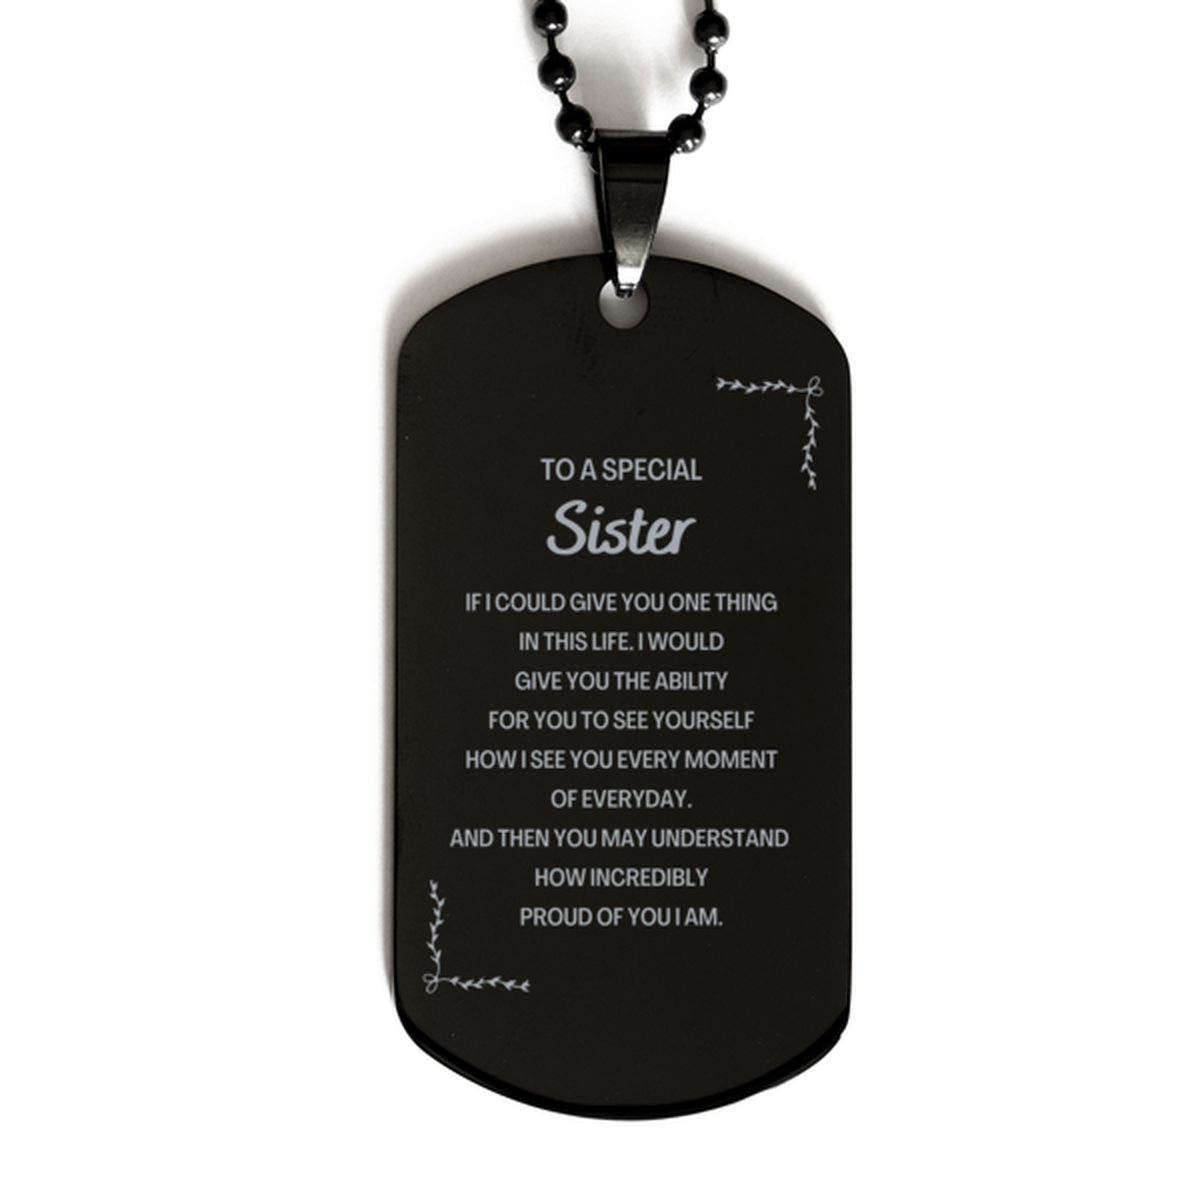 To My Sister Black Dog Tag, Gifts For Sister Engraved, Inspirational Gifts for Christmas Birthday, Epic Gifts for Sister To A Special Sister how incredibly proud of you I am